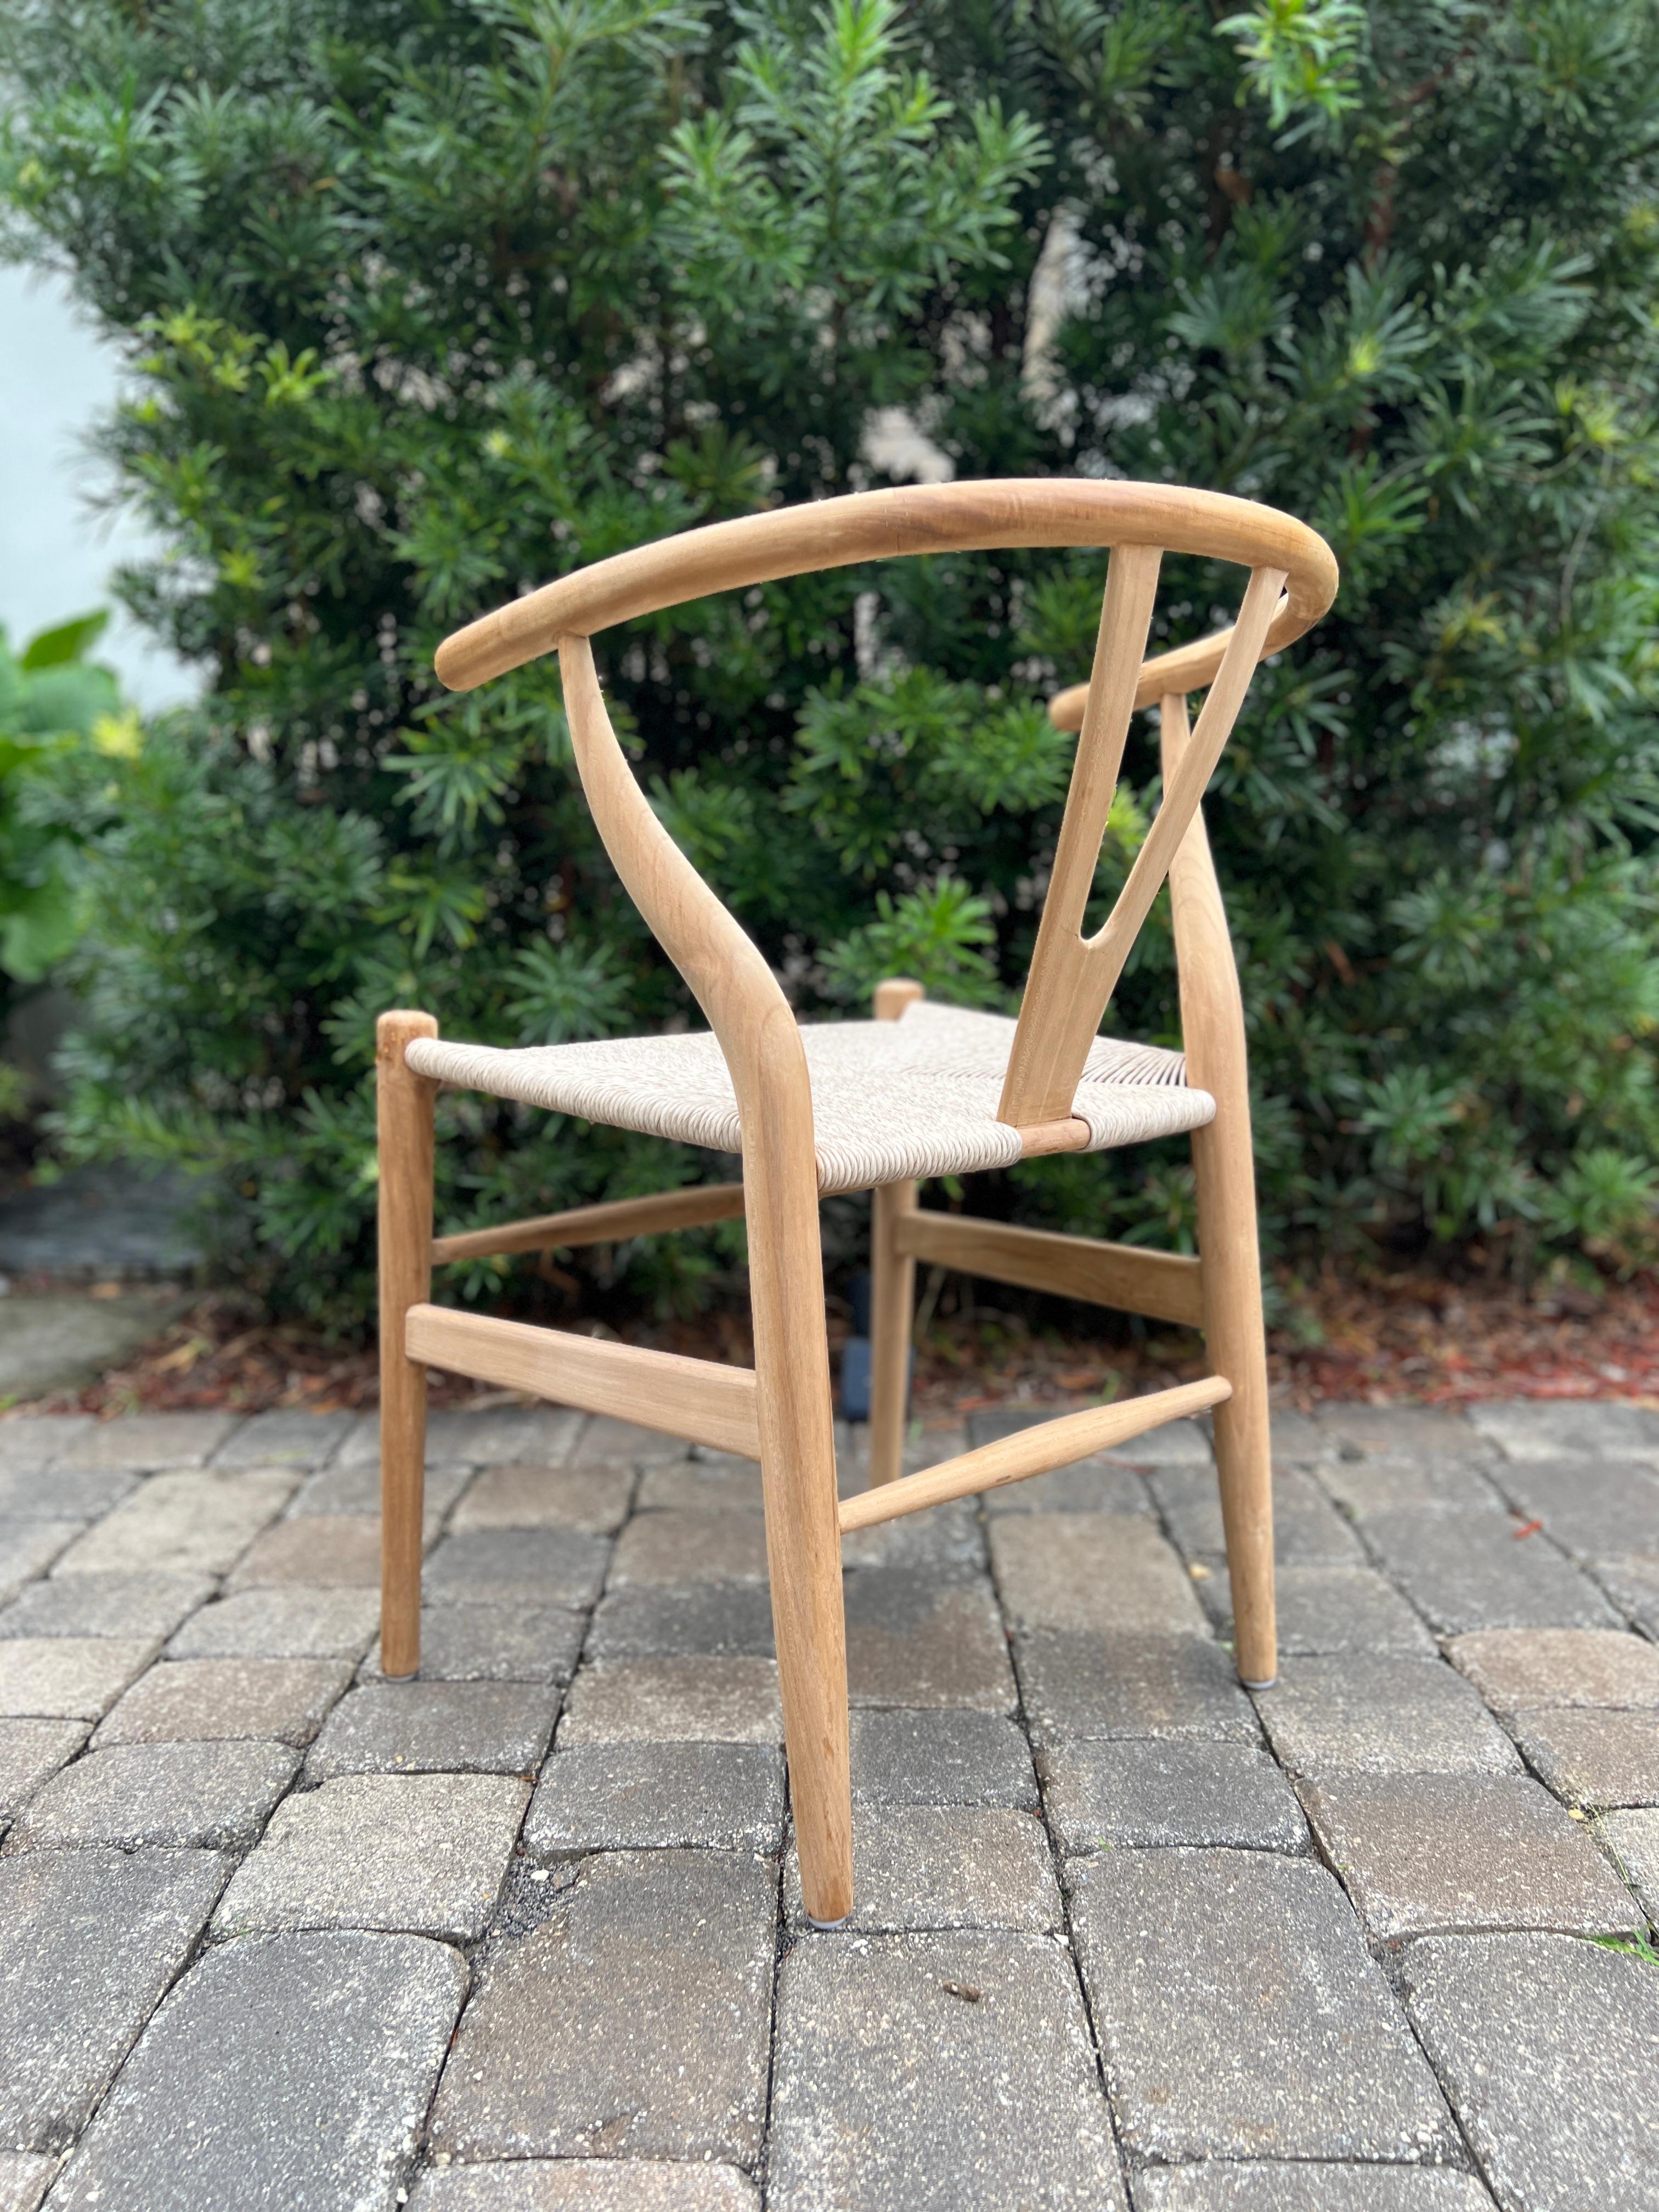 Mid-Century Modern Chair in Natural Teak Wood with Handwoven Seat, Denmark 1